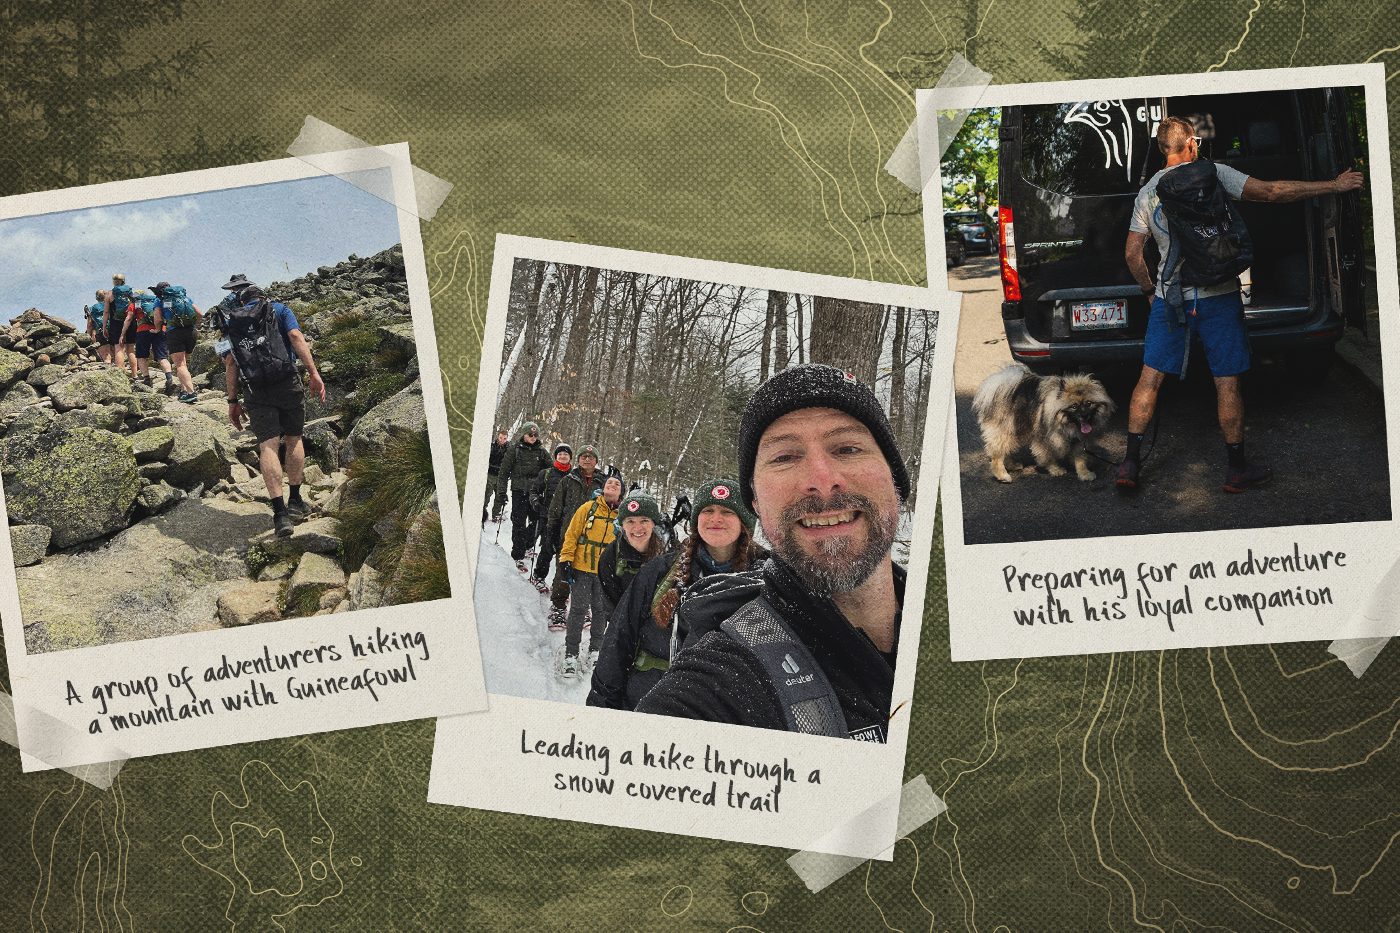 Collage of 3 polaroid-style photos superimposed over a topographical map. Left-to-right: "A group of adventurers hiking a mountain with Guinefowl", "Leading a hike through a snow-covered trail", and "Preparing for an adventure with his loyal companion" (Fatula and his dog).